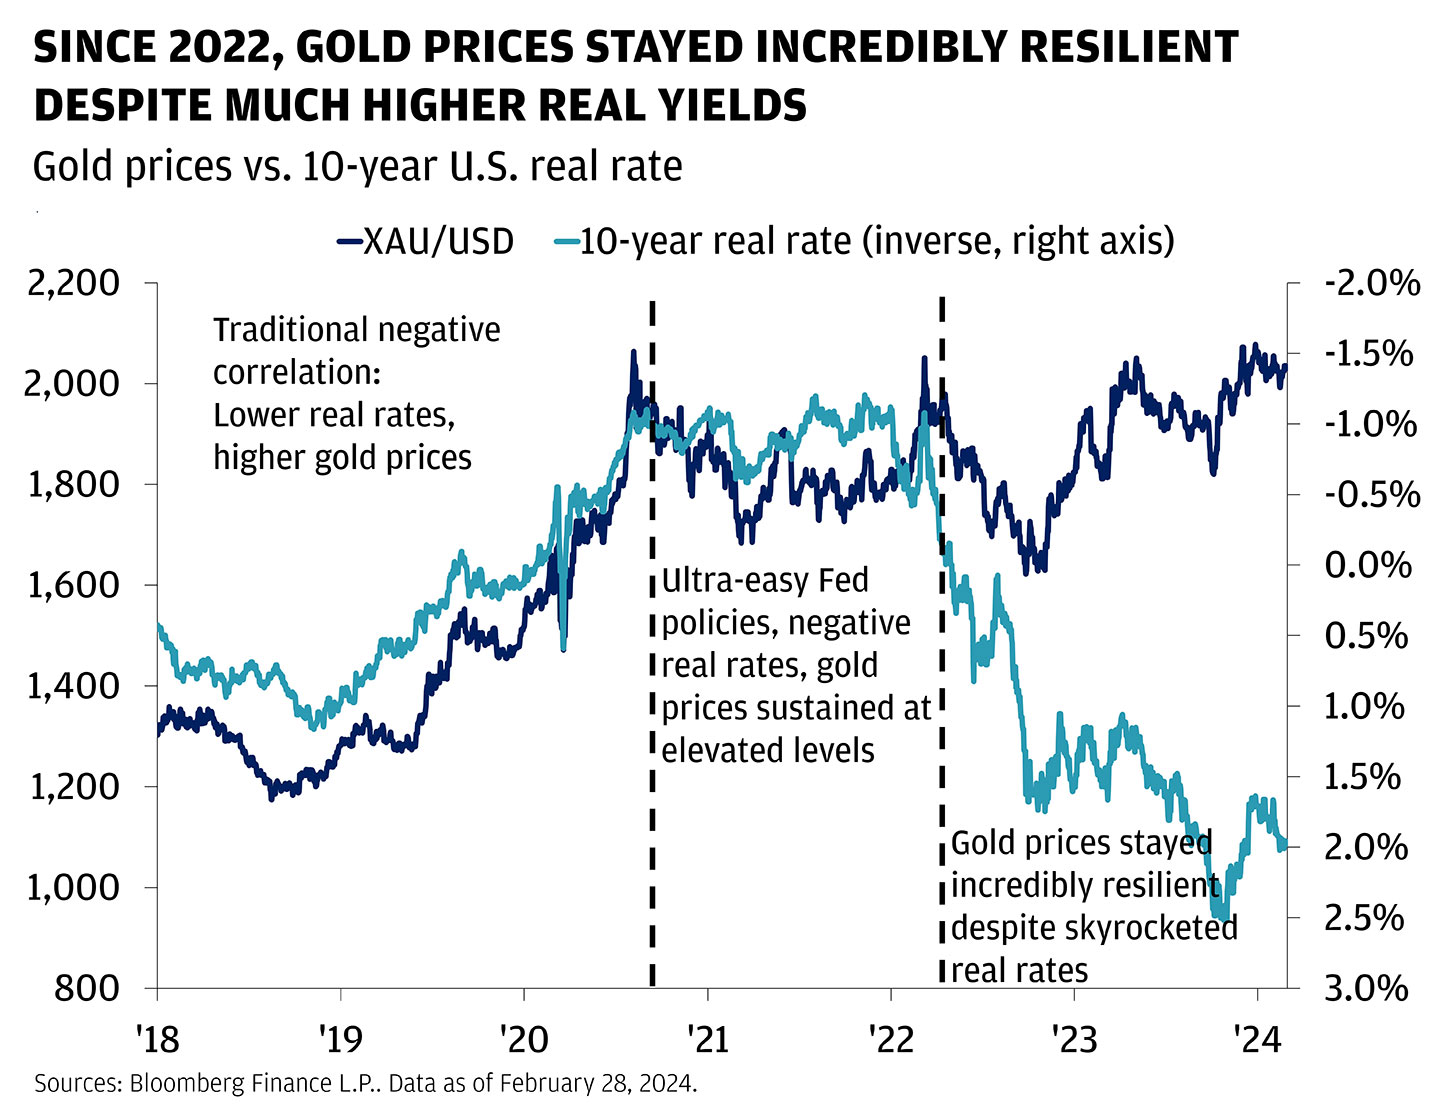 This line chart shows the correlation between gold prices and 10-year U.S. real rates from 2018 to 2024.